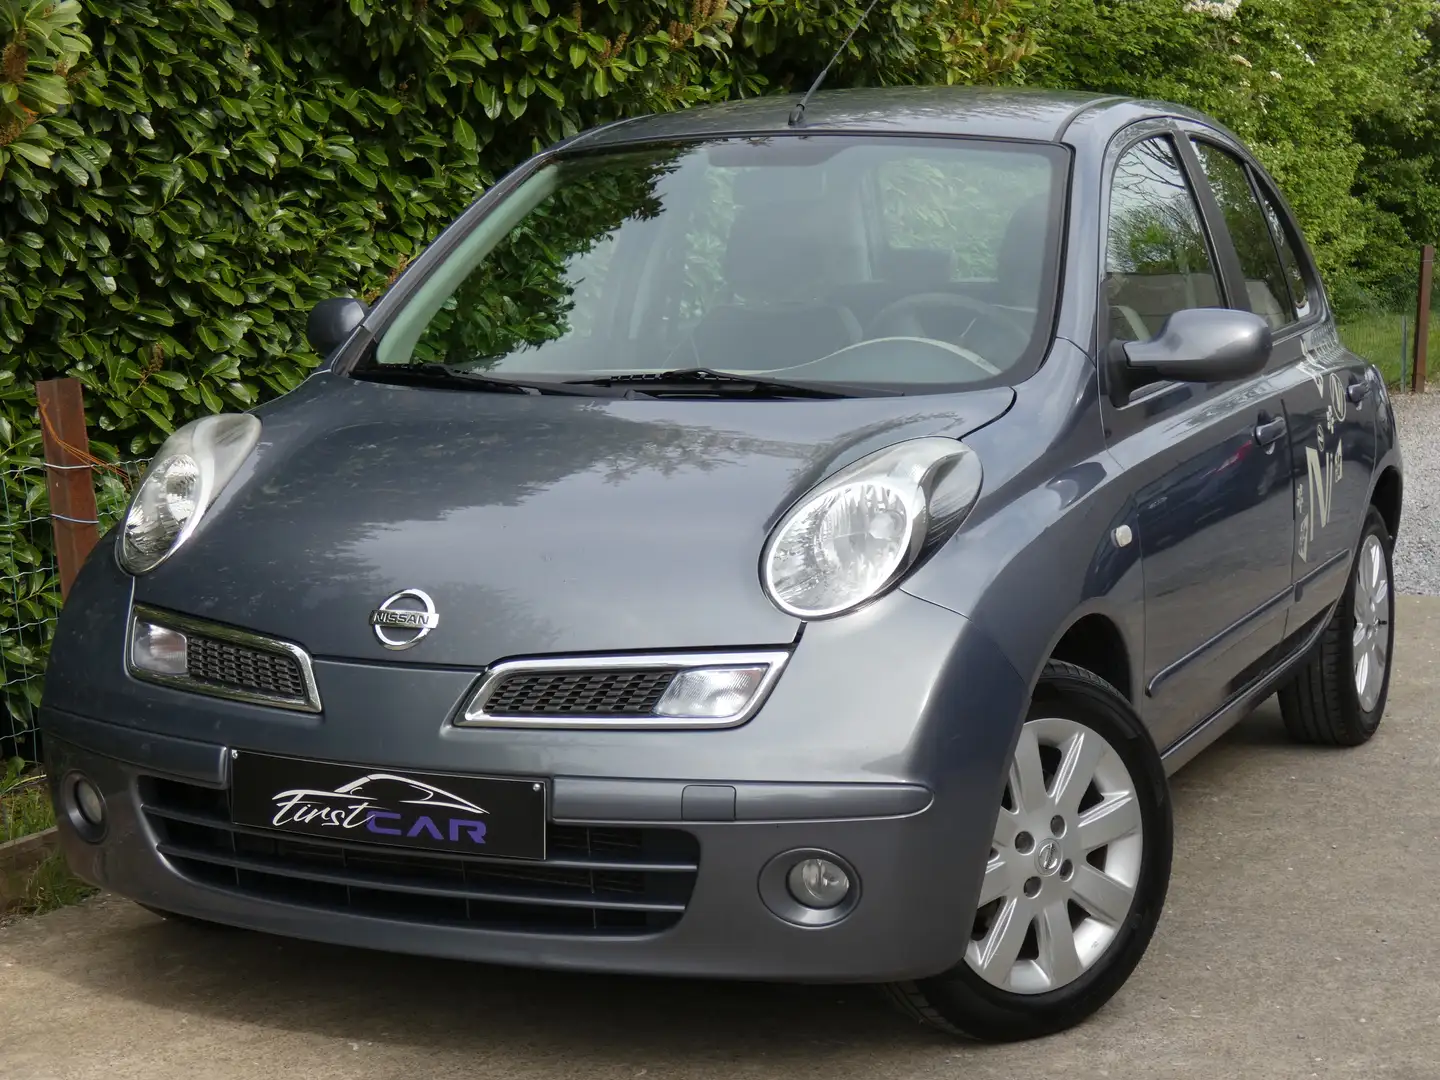 Nissan Micra 1.2i - Full Carnet Entretien - Air Conditionne siva - 1